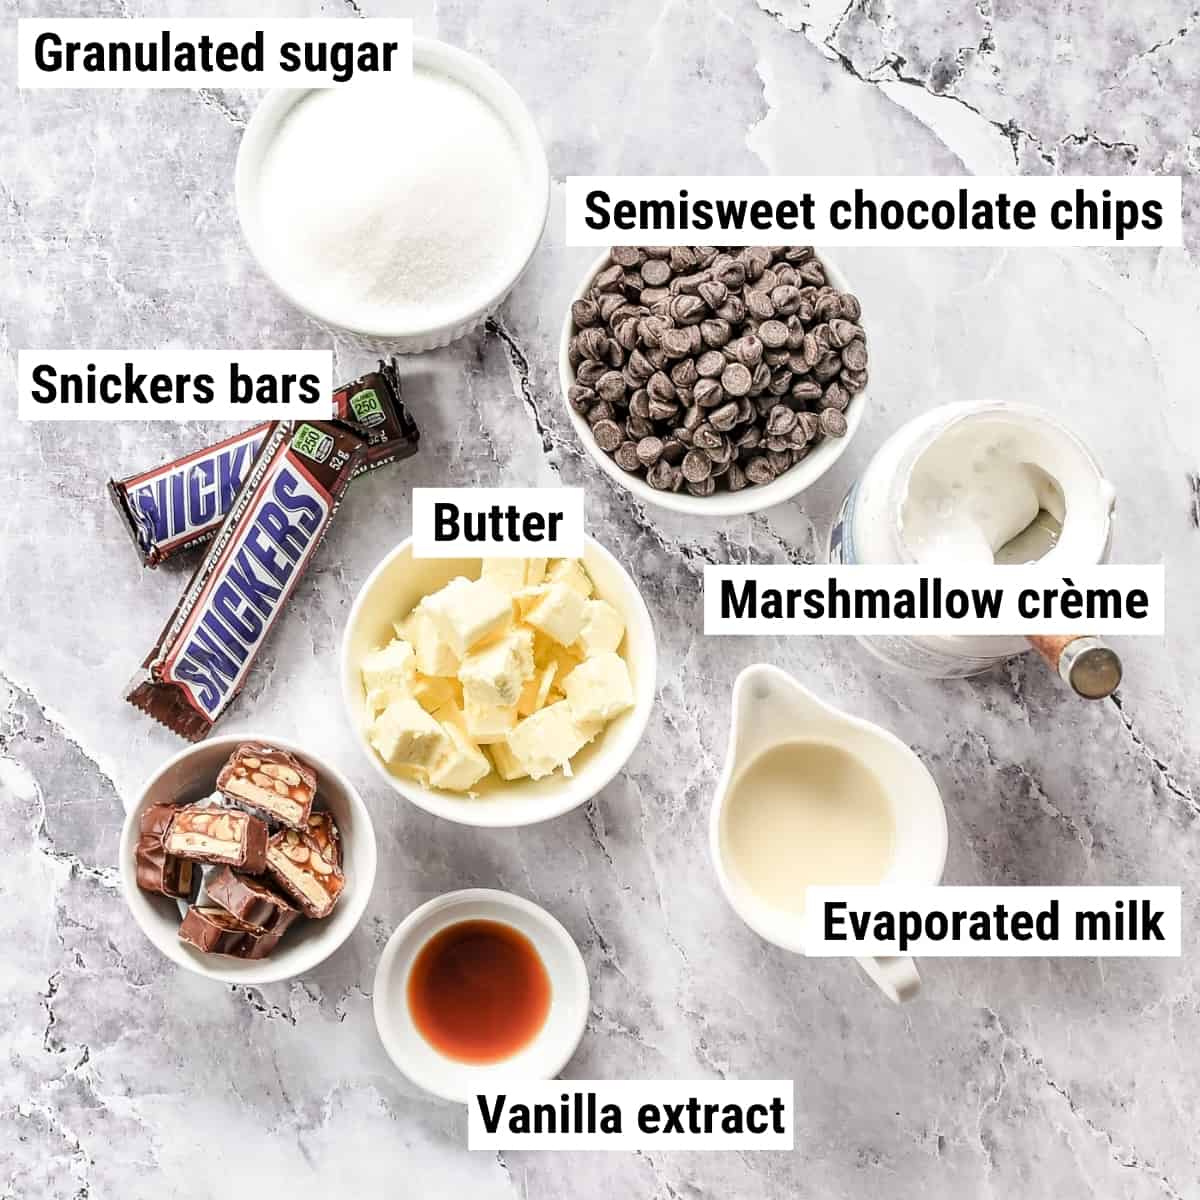 The ingredients to make Snickers fudge laid out on a table.